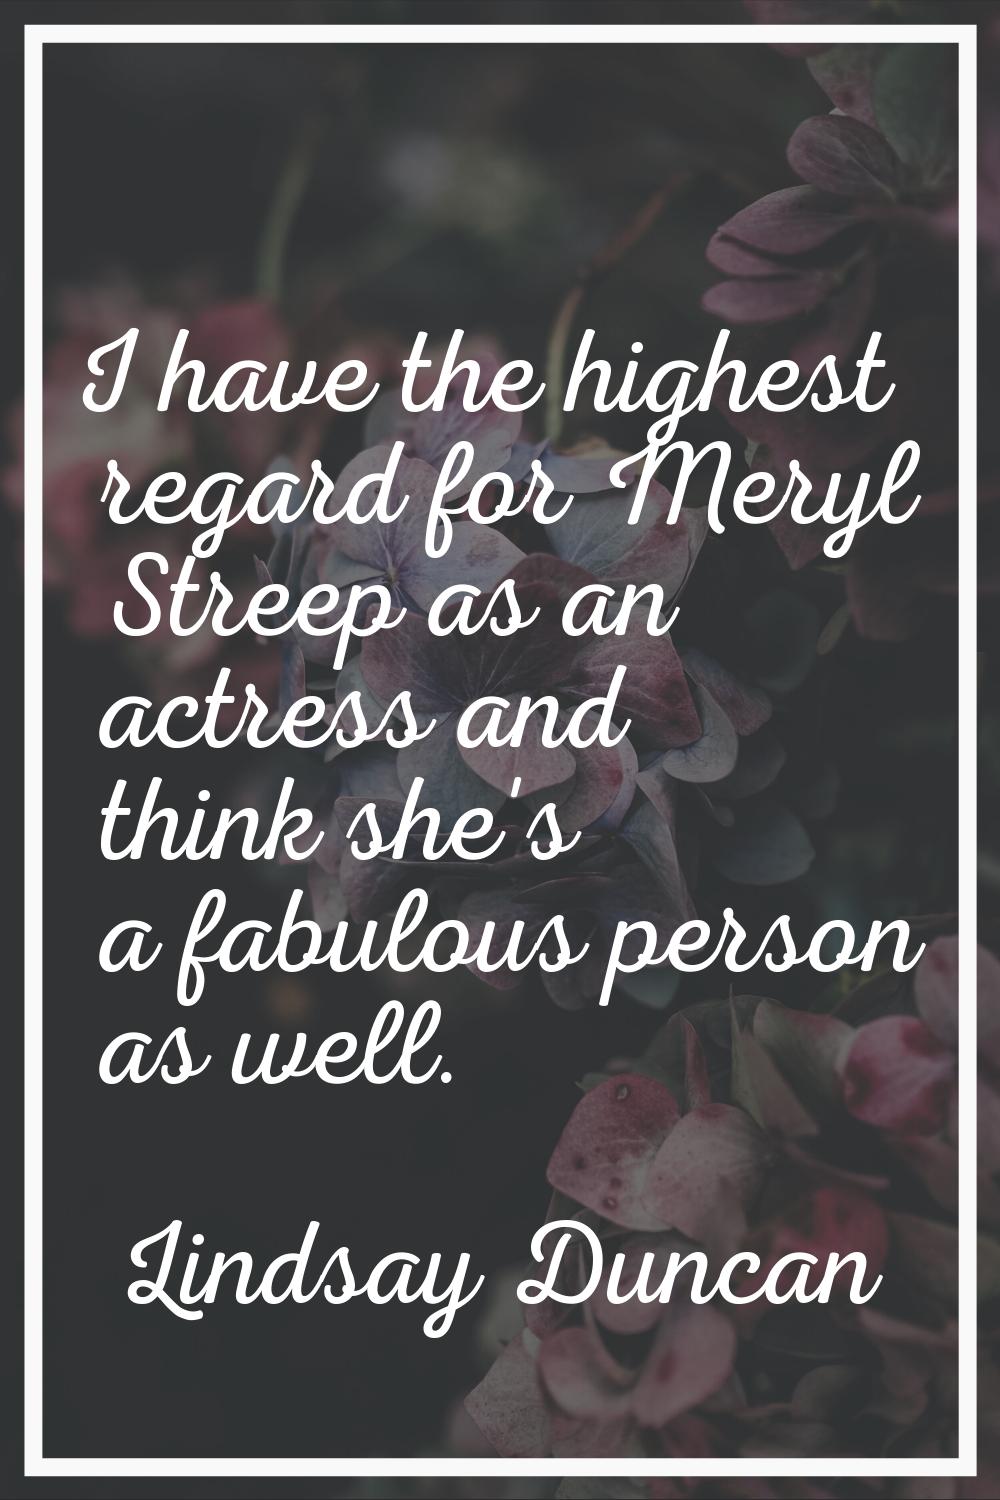 I have the highest regard for Meryl Streep as an actress and think she's a fabulous person as well.